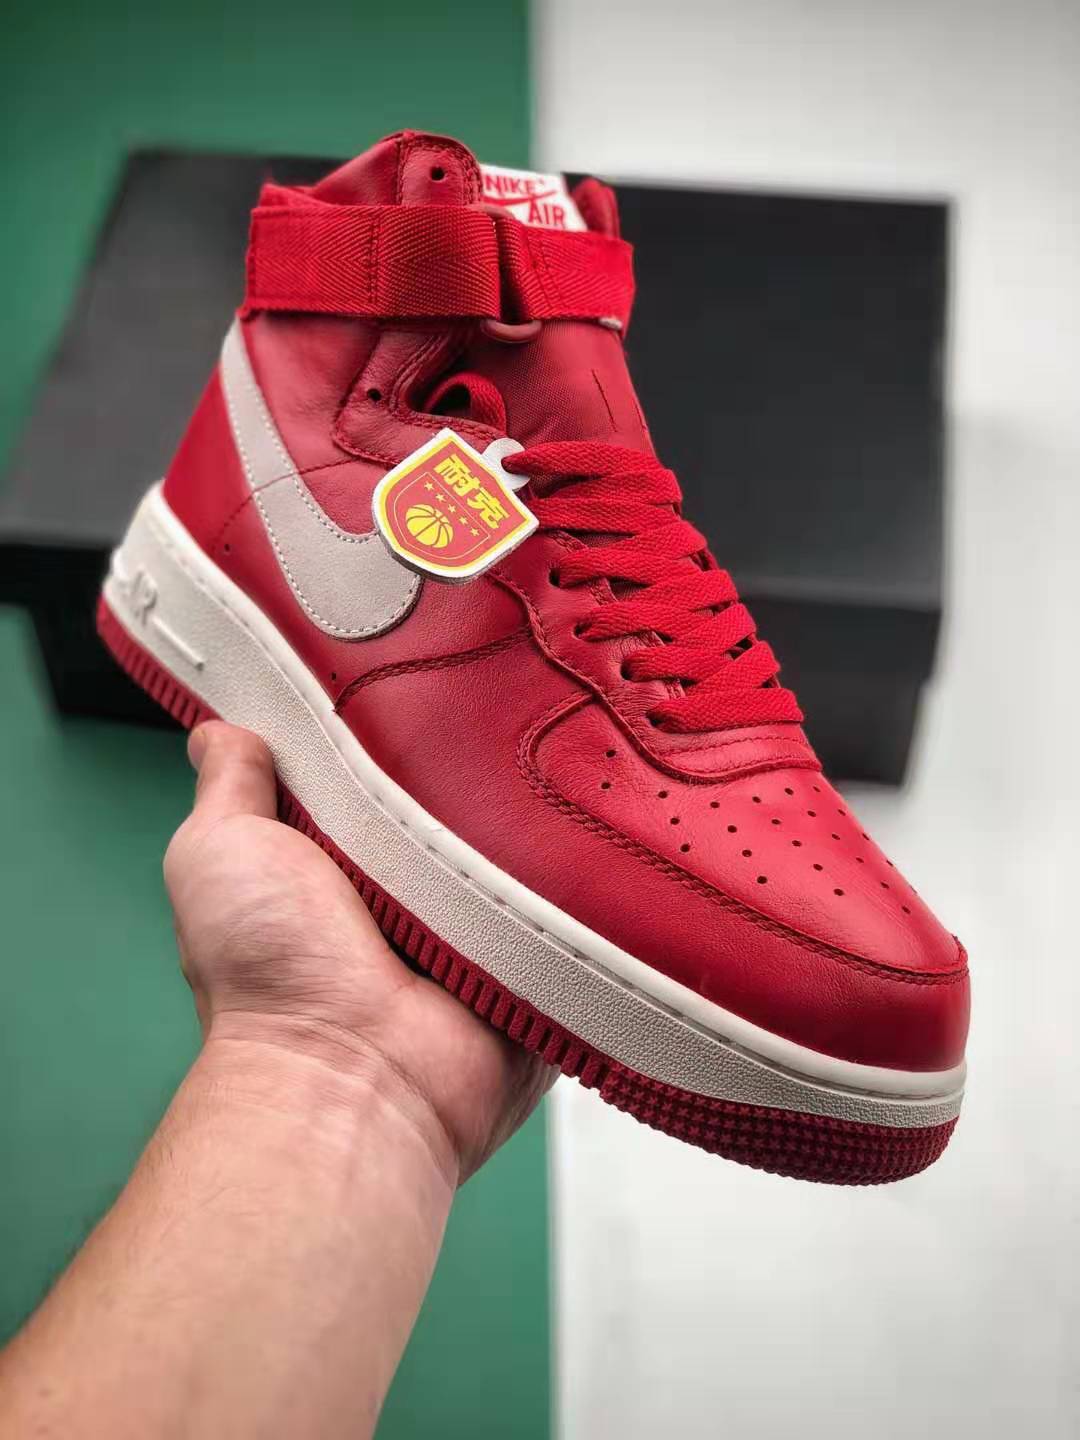 Nike Air Force 1 High NAI-KE Gym Red 2015 743546-600 - Premium Sneakers with Iconic Design